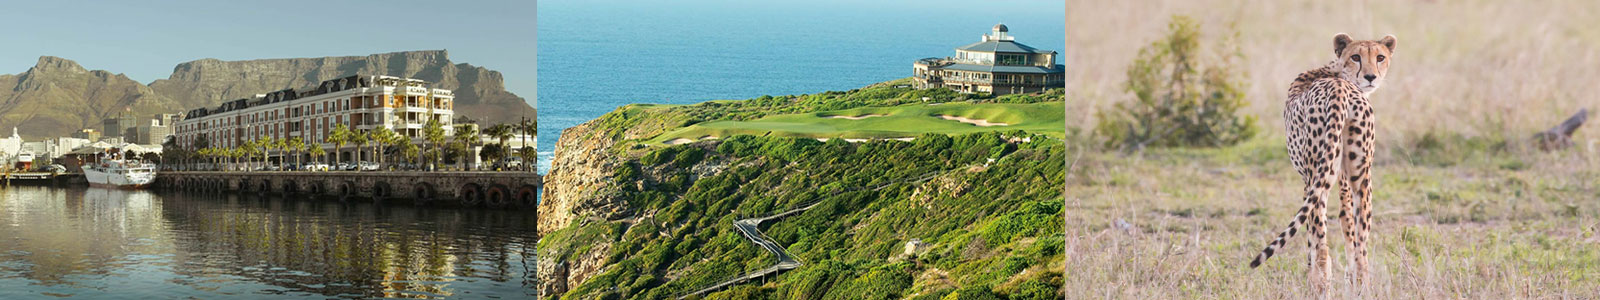 The Best of South Africa 2022 ~ Golf, Safari, Cape Town, the Winelands & Garden Route